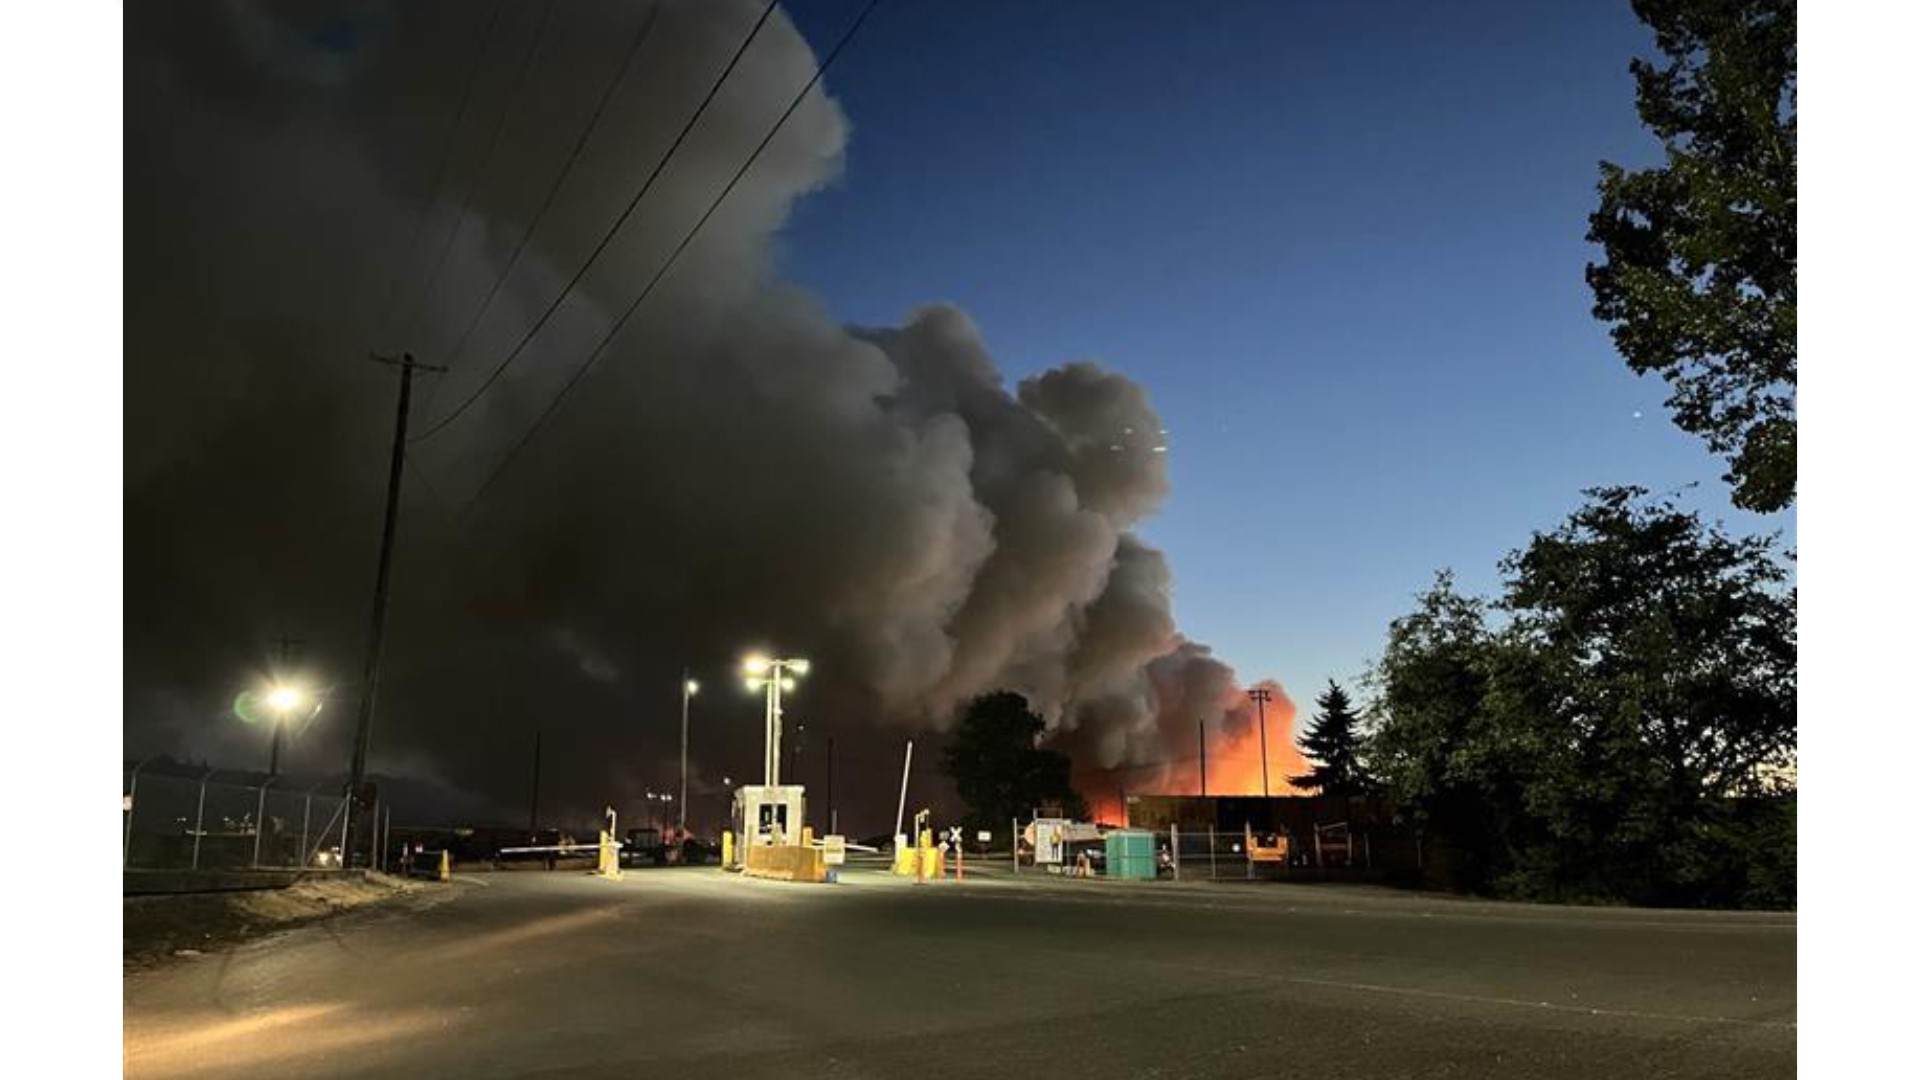 The fire broke out at Weyerhaeuser paper company on Industrial Way. The fire is contained to the woodchip piles. No injuries have been reported.